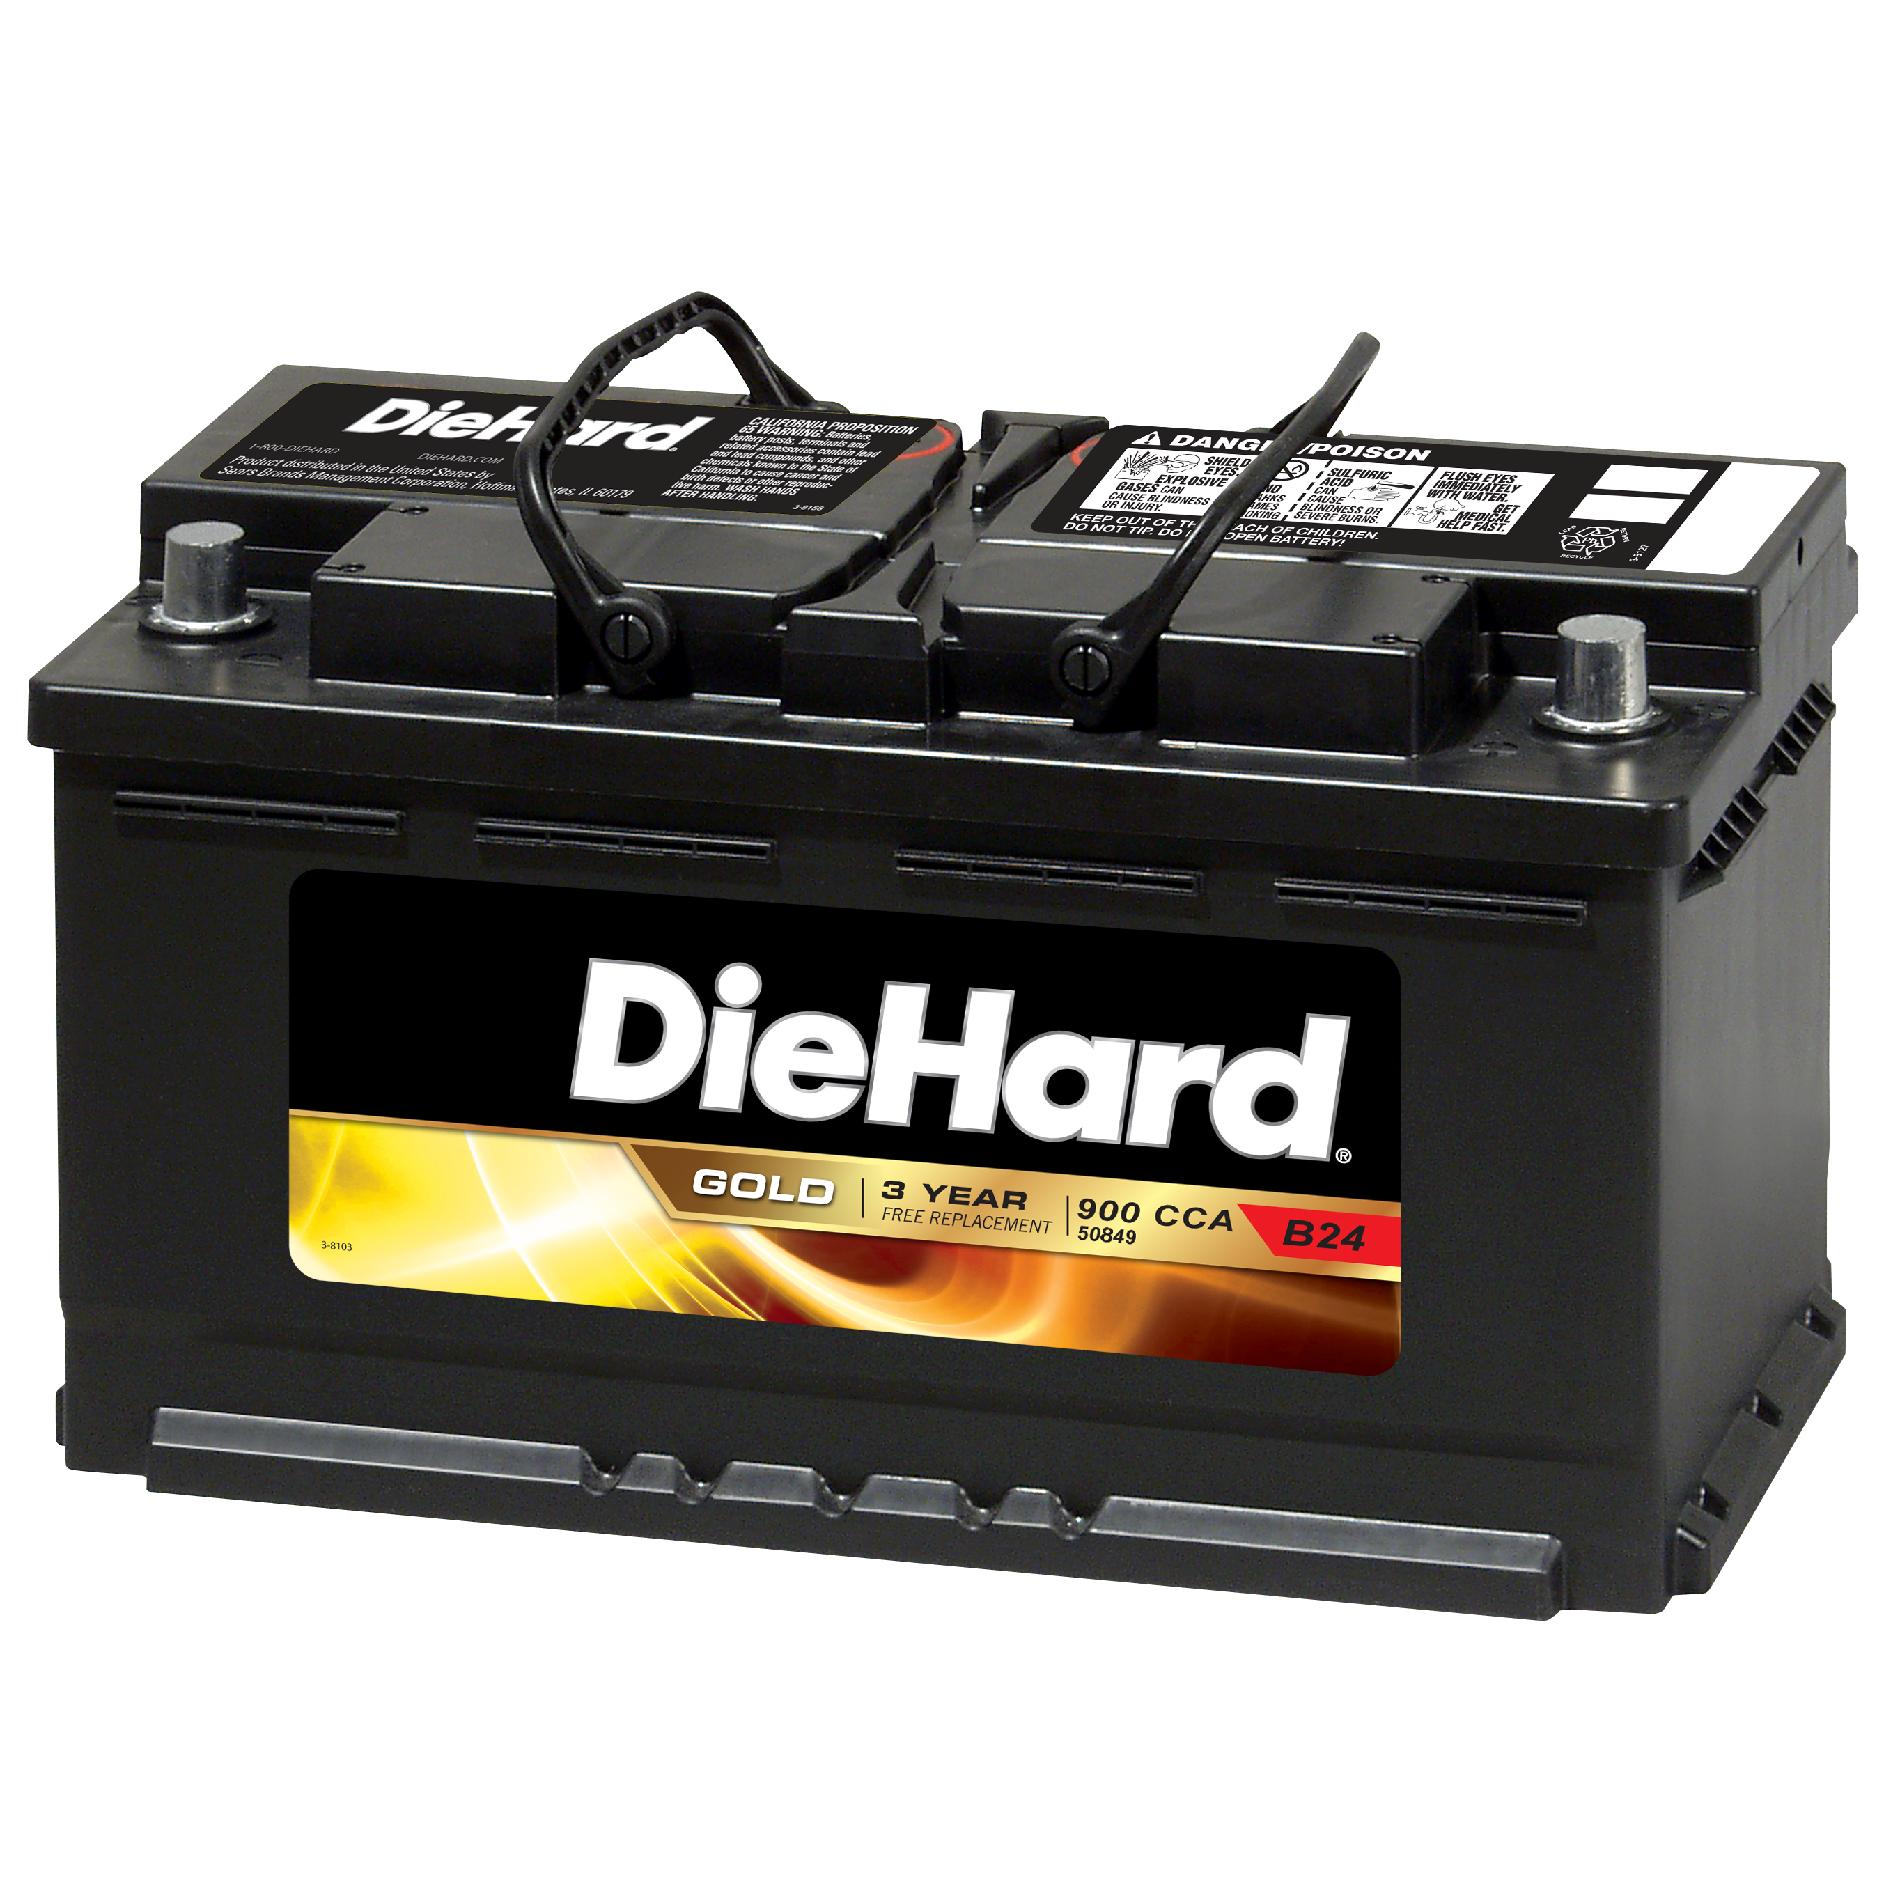 DieHard Gold Automotive Battery - Group Size EP-49 (Price with Exchange)